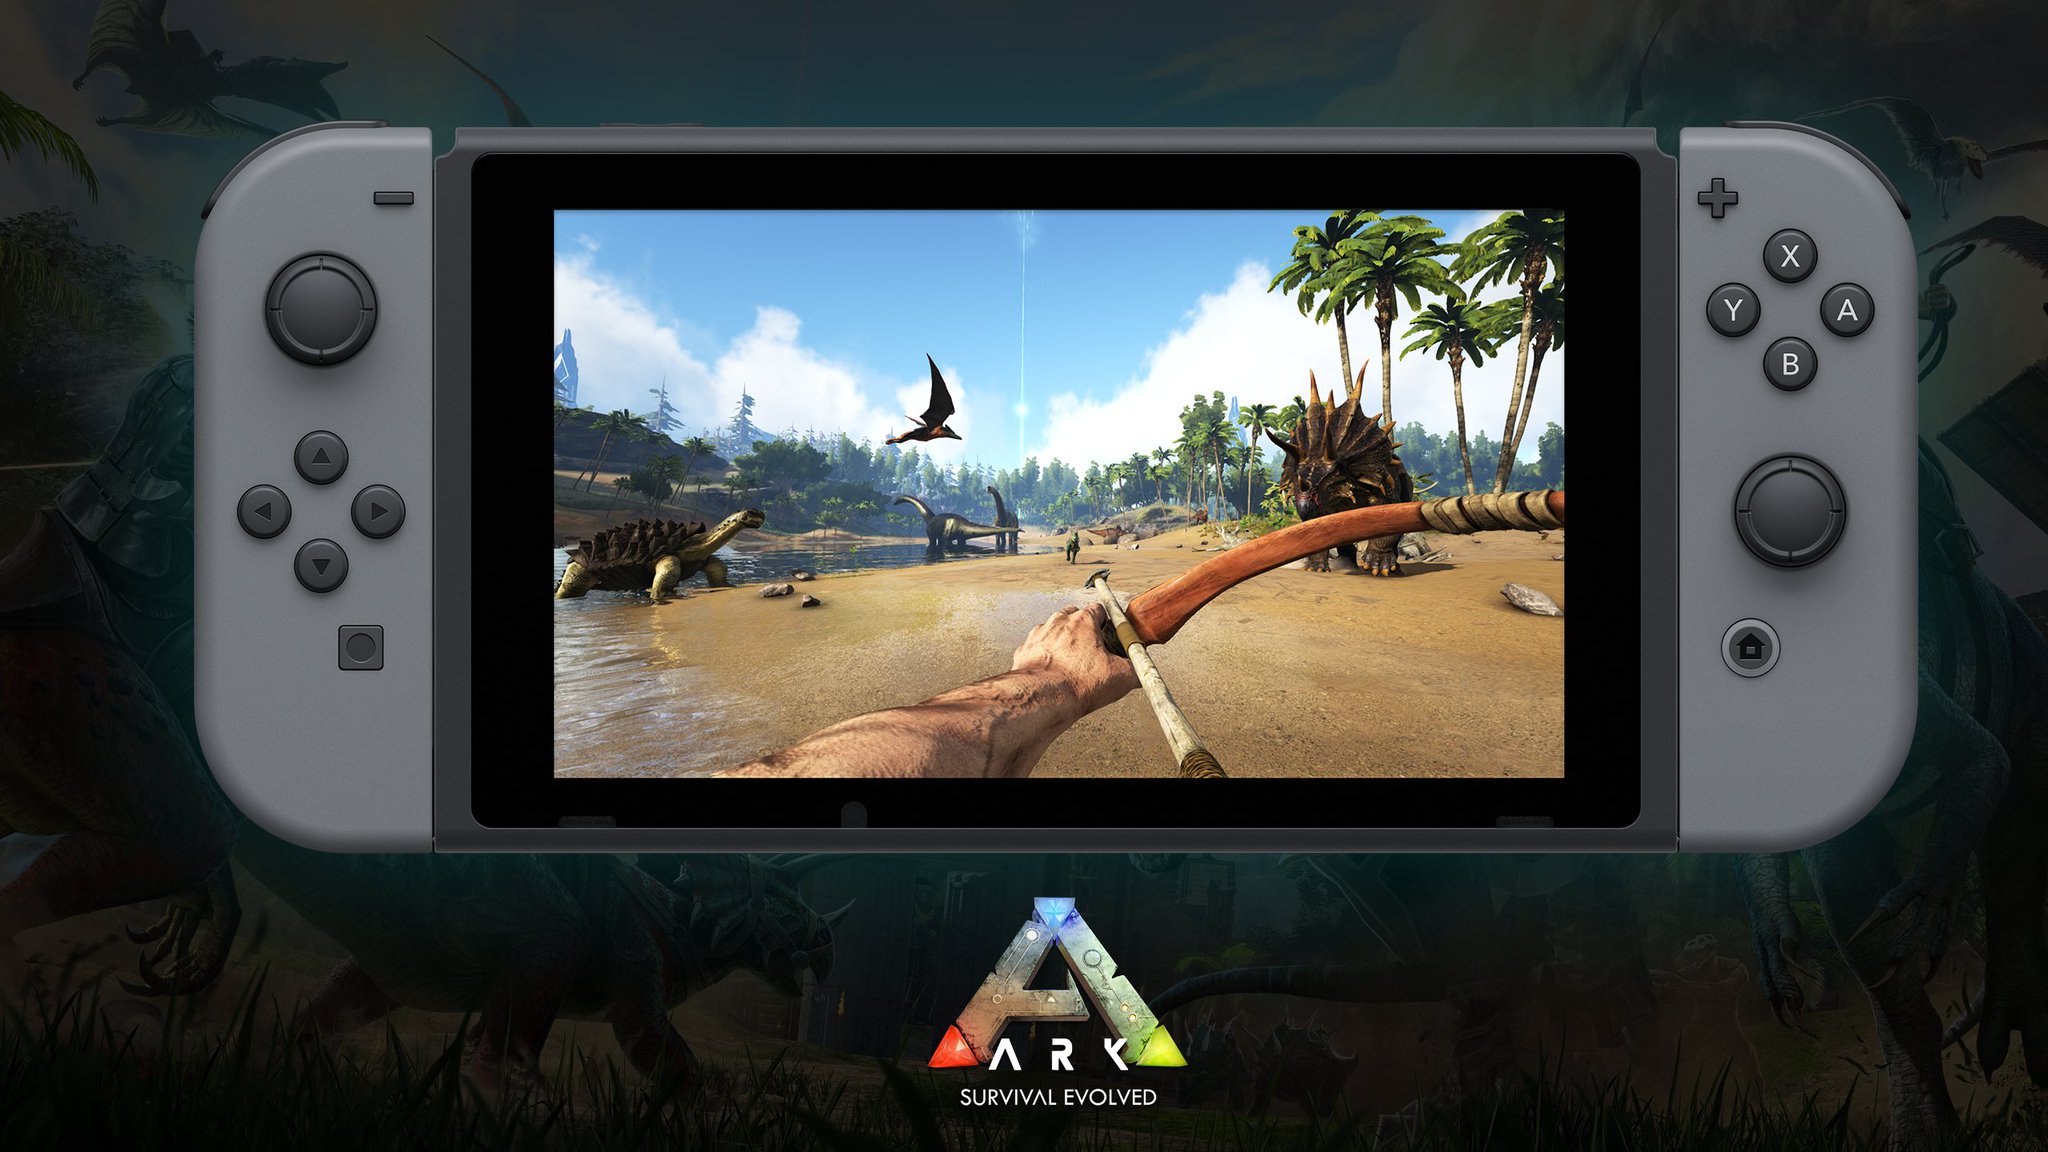 Ark Survival Evolved Ark Survival Evolved Will Be Making It S Way To The Nintendo Switch T Co Ededqqacp6 Playark Arknintendo Abstractiongame T Co Tcehm0df31